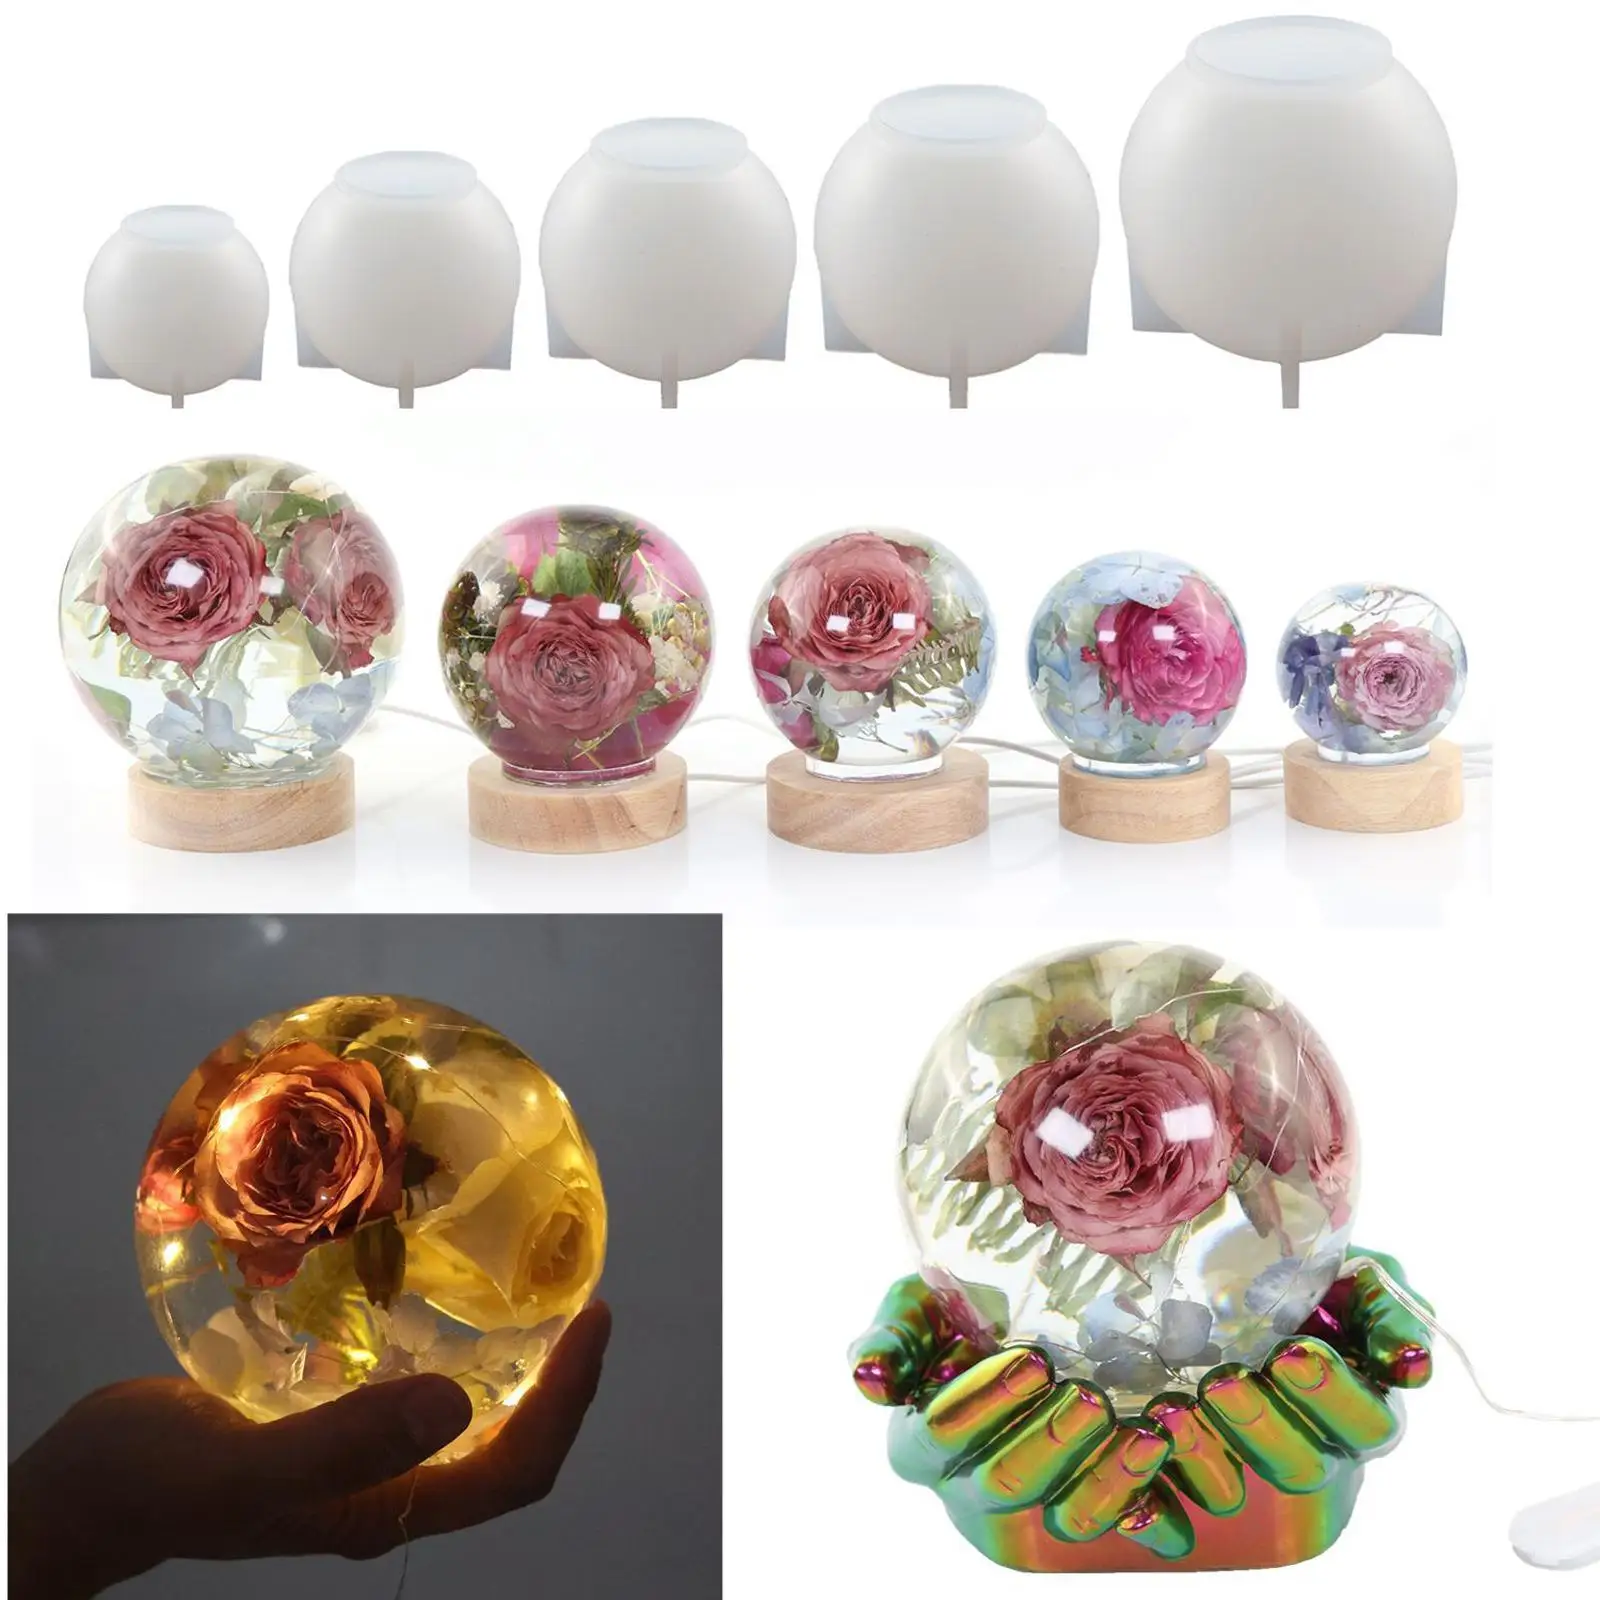 Sphere Round for Resin Epoxy, Jewelry Making, Candle Wax, Homemade Soap, Bath 